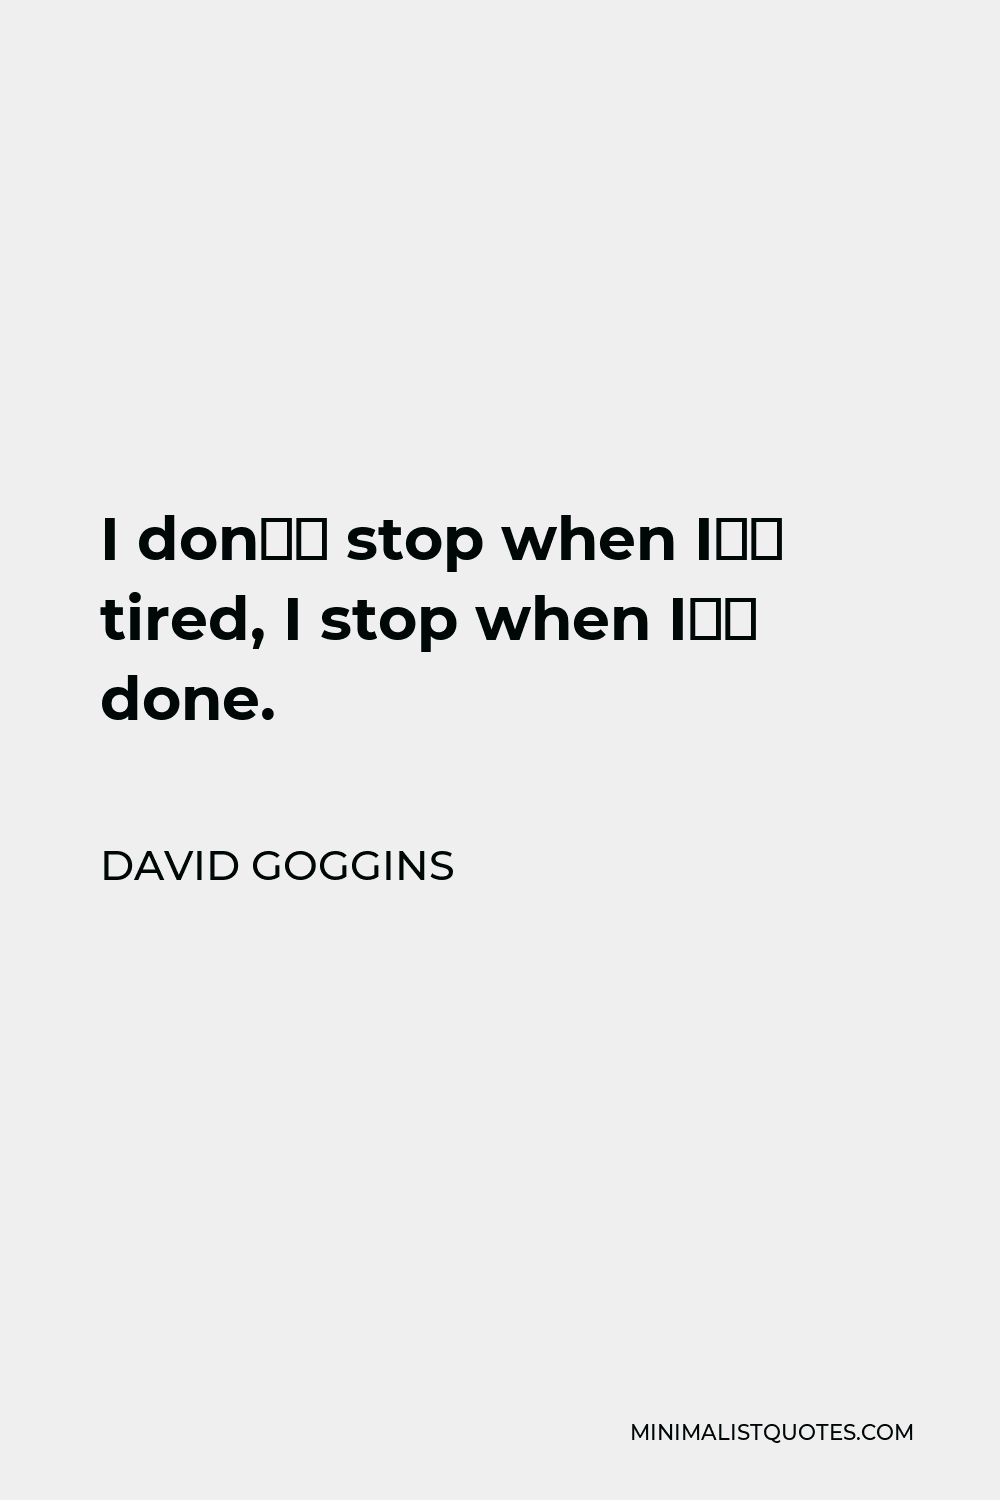 David Goggins Quote: I don't stop when I'm tired, I stop when I'm done.